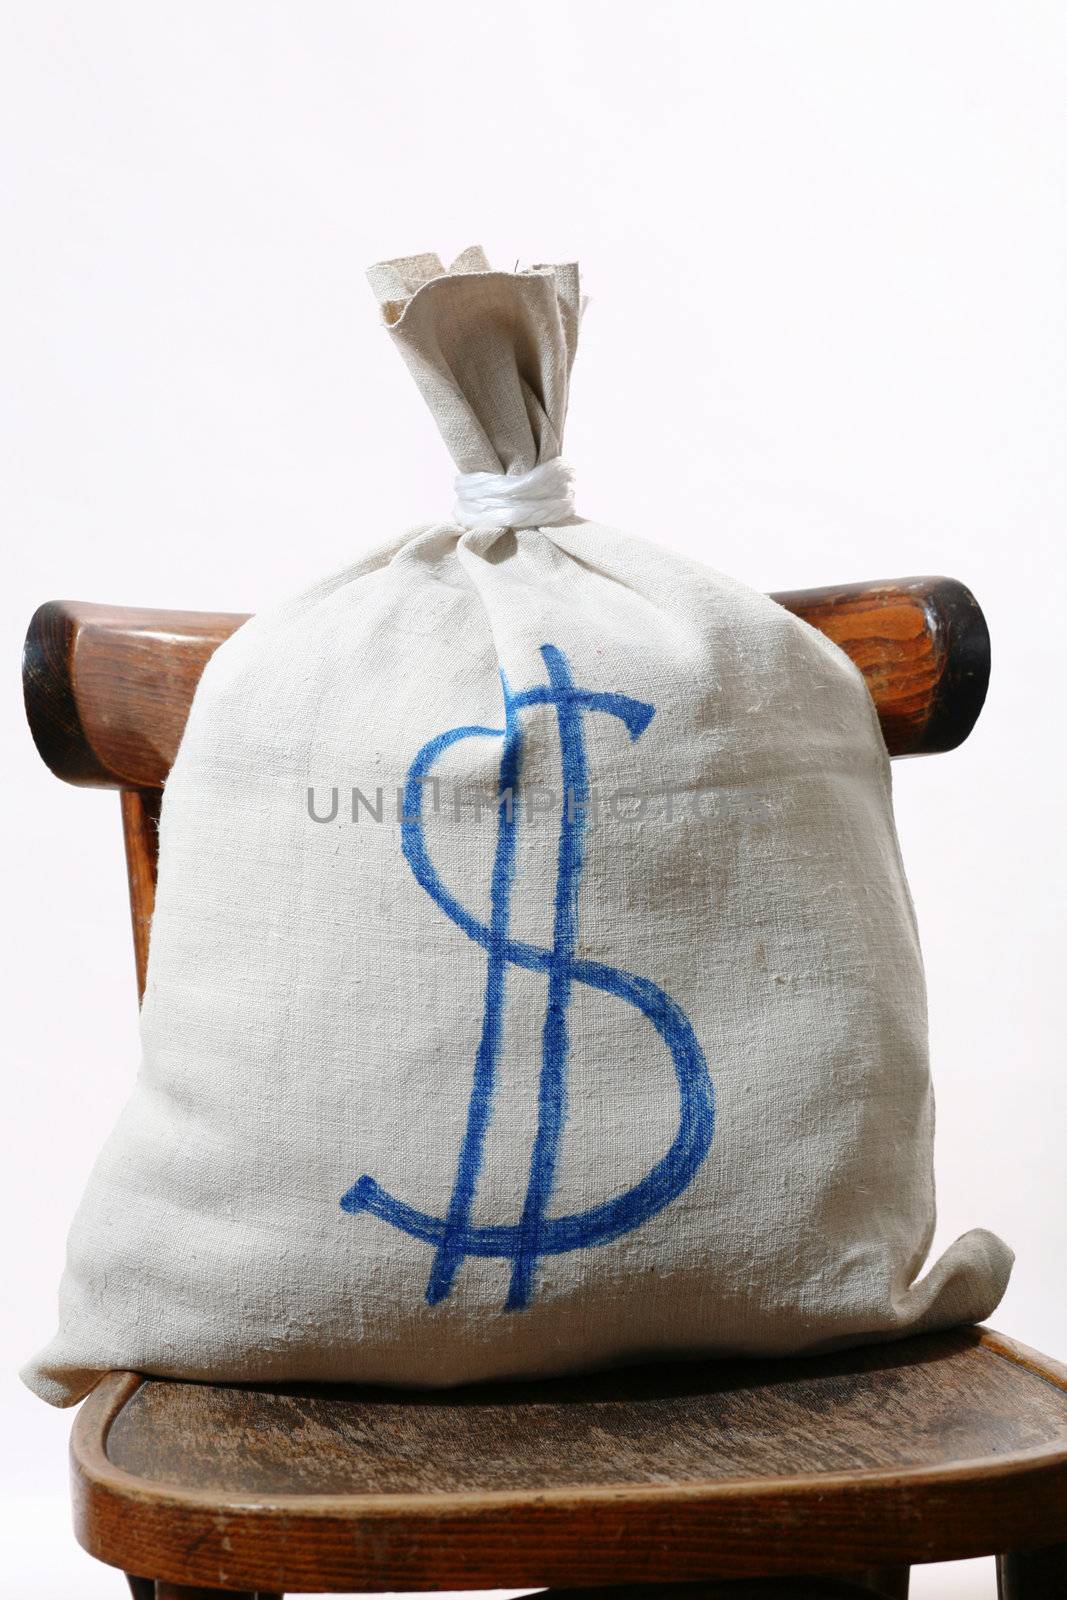 An image of a white bag with sign dollar on it